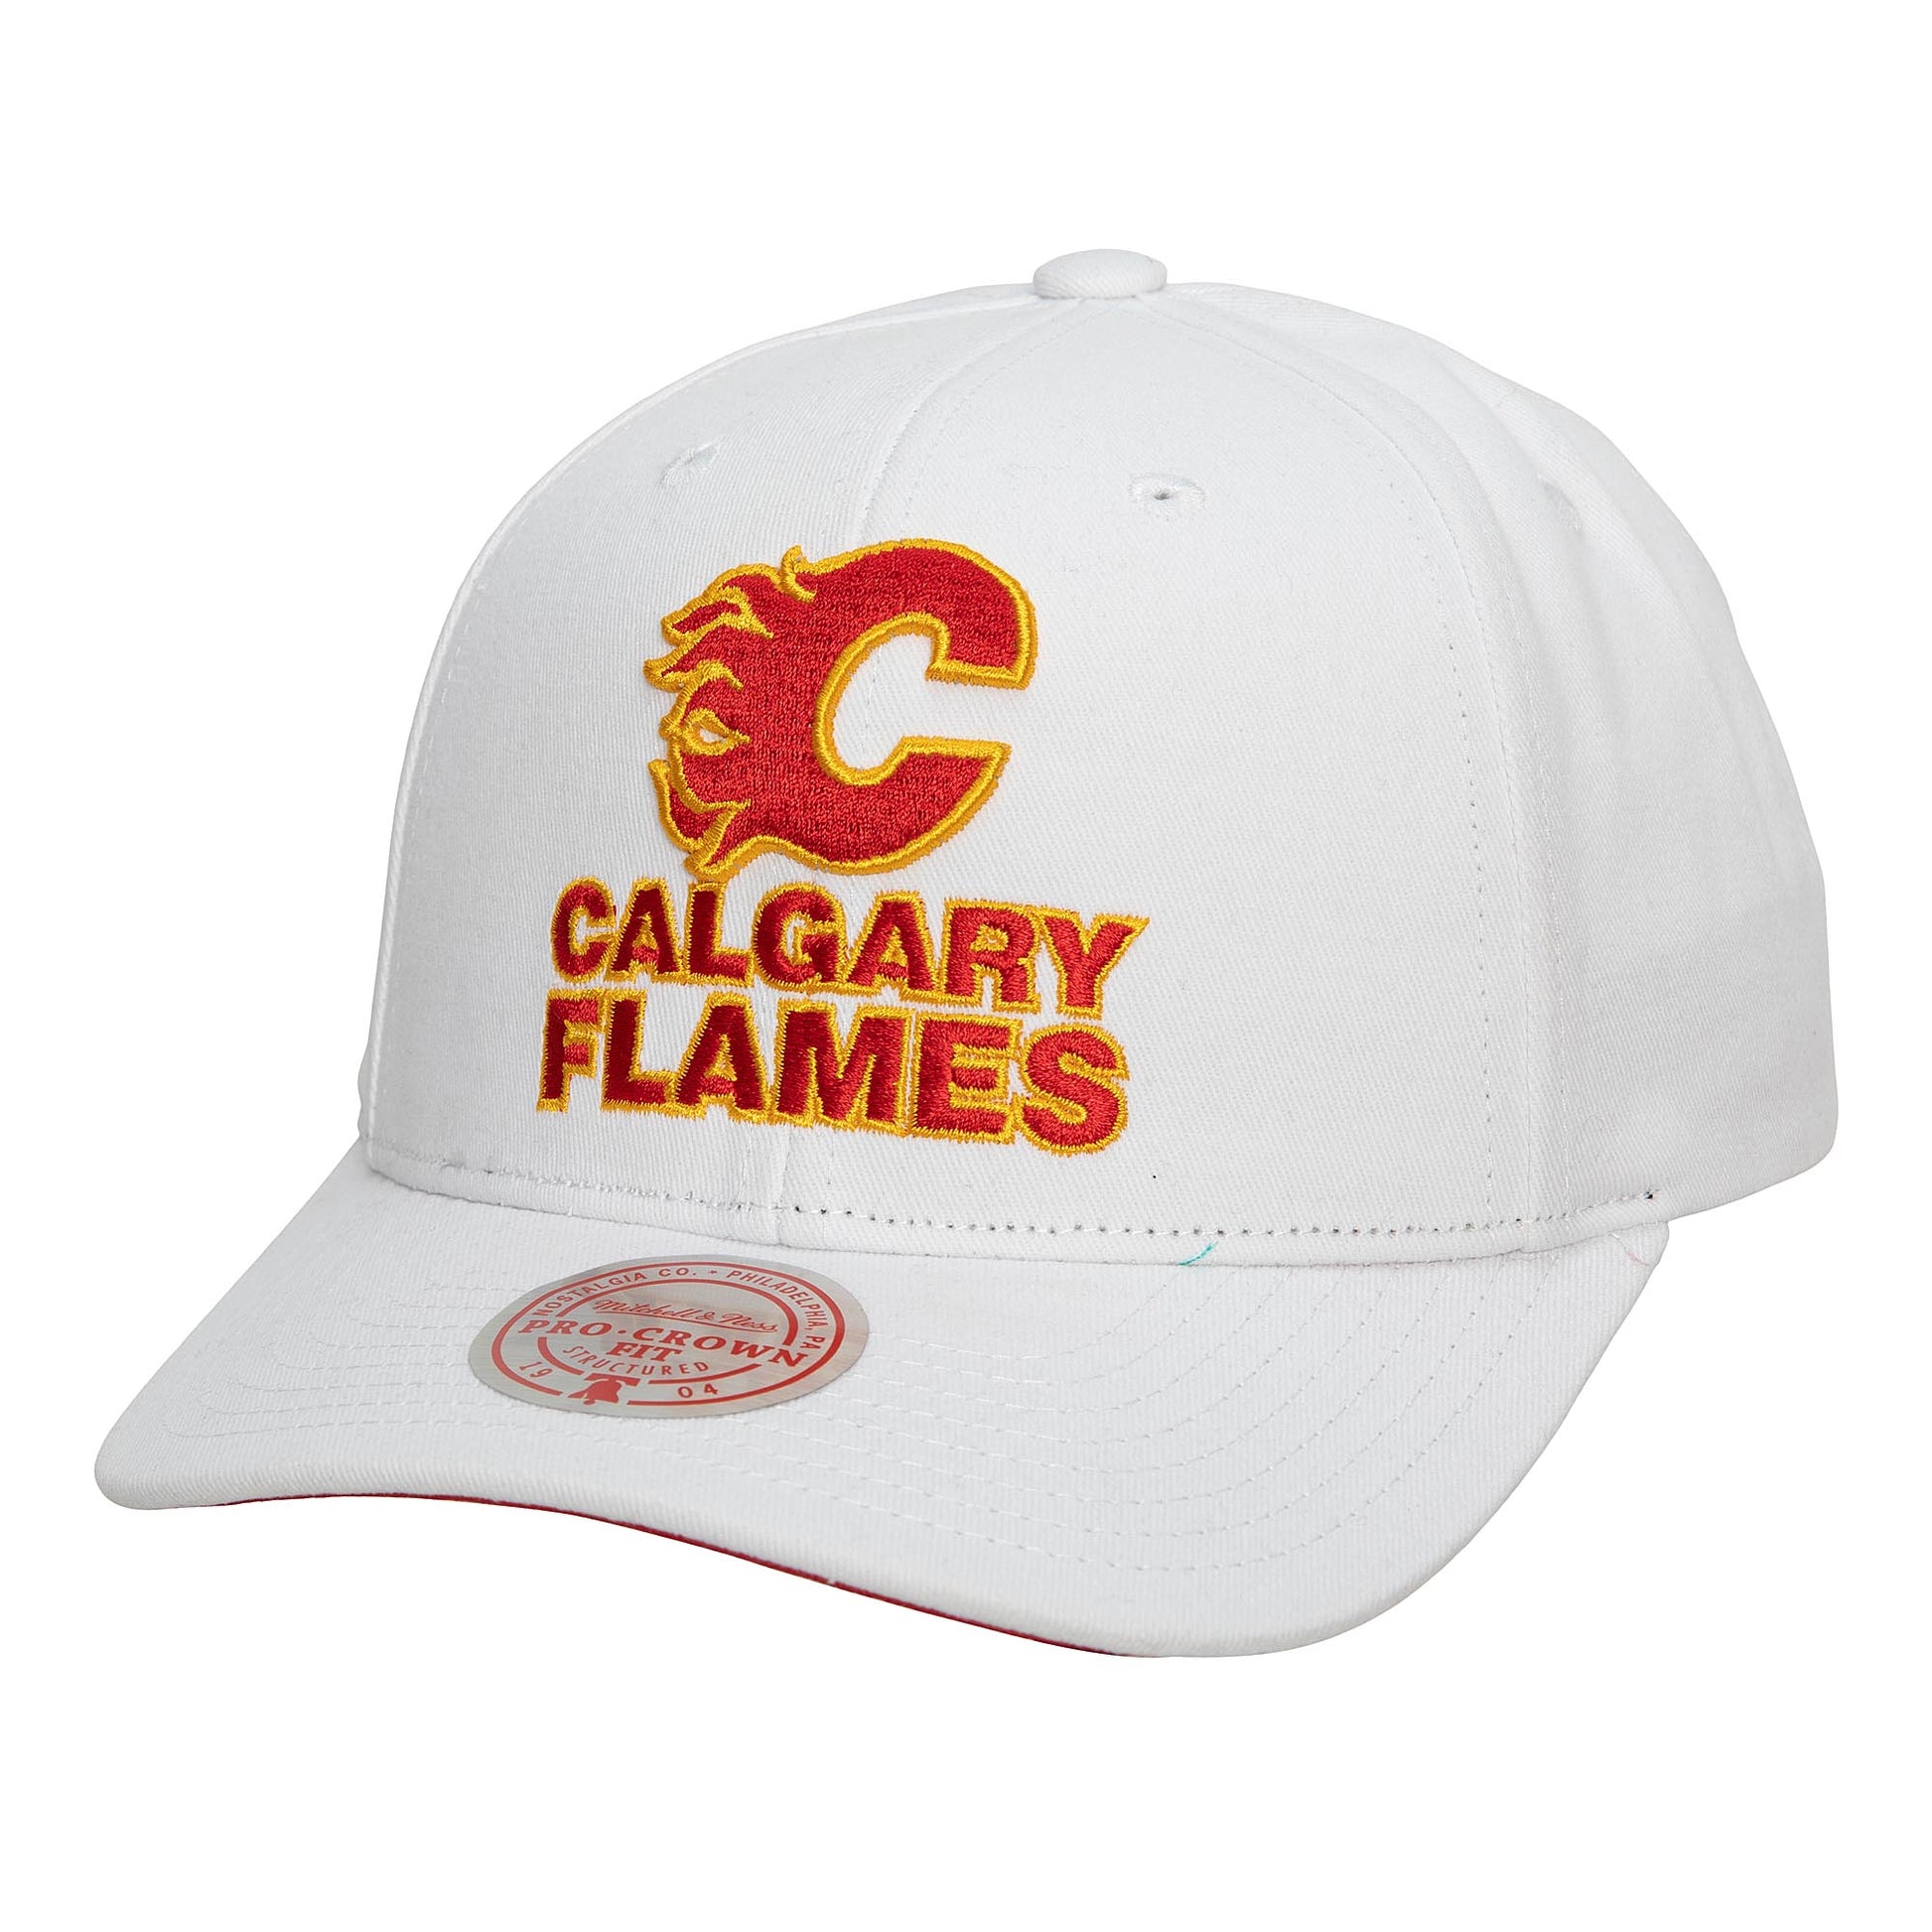 All In Pro Snapback - Calgary Flames White